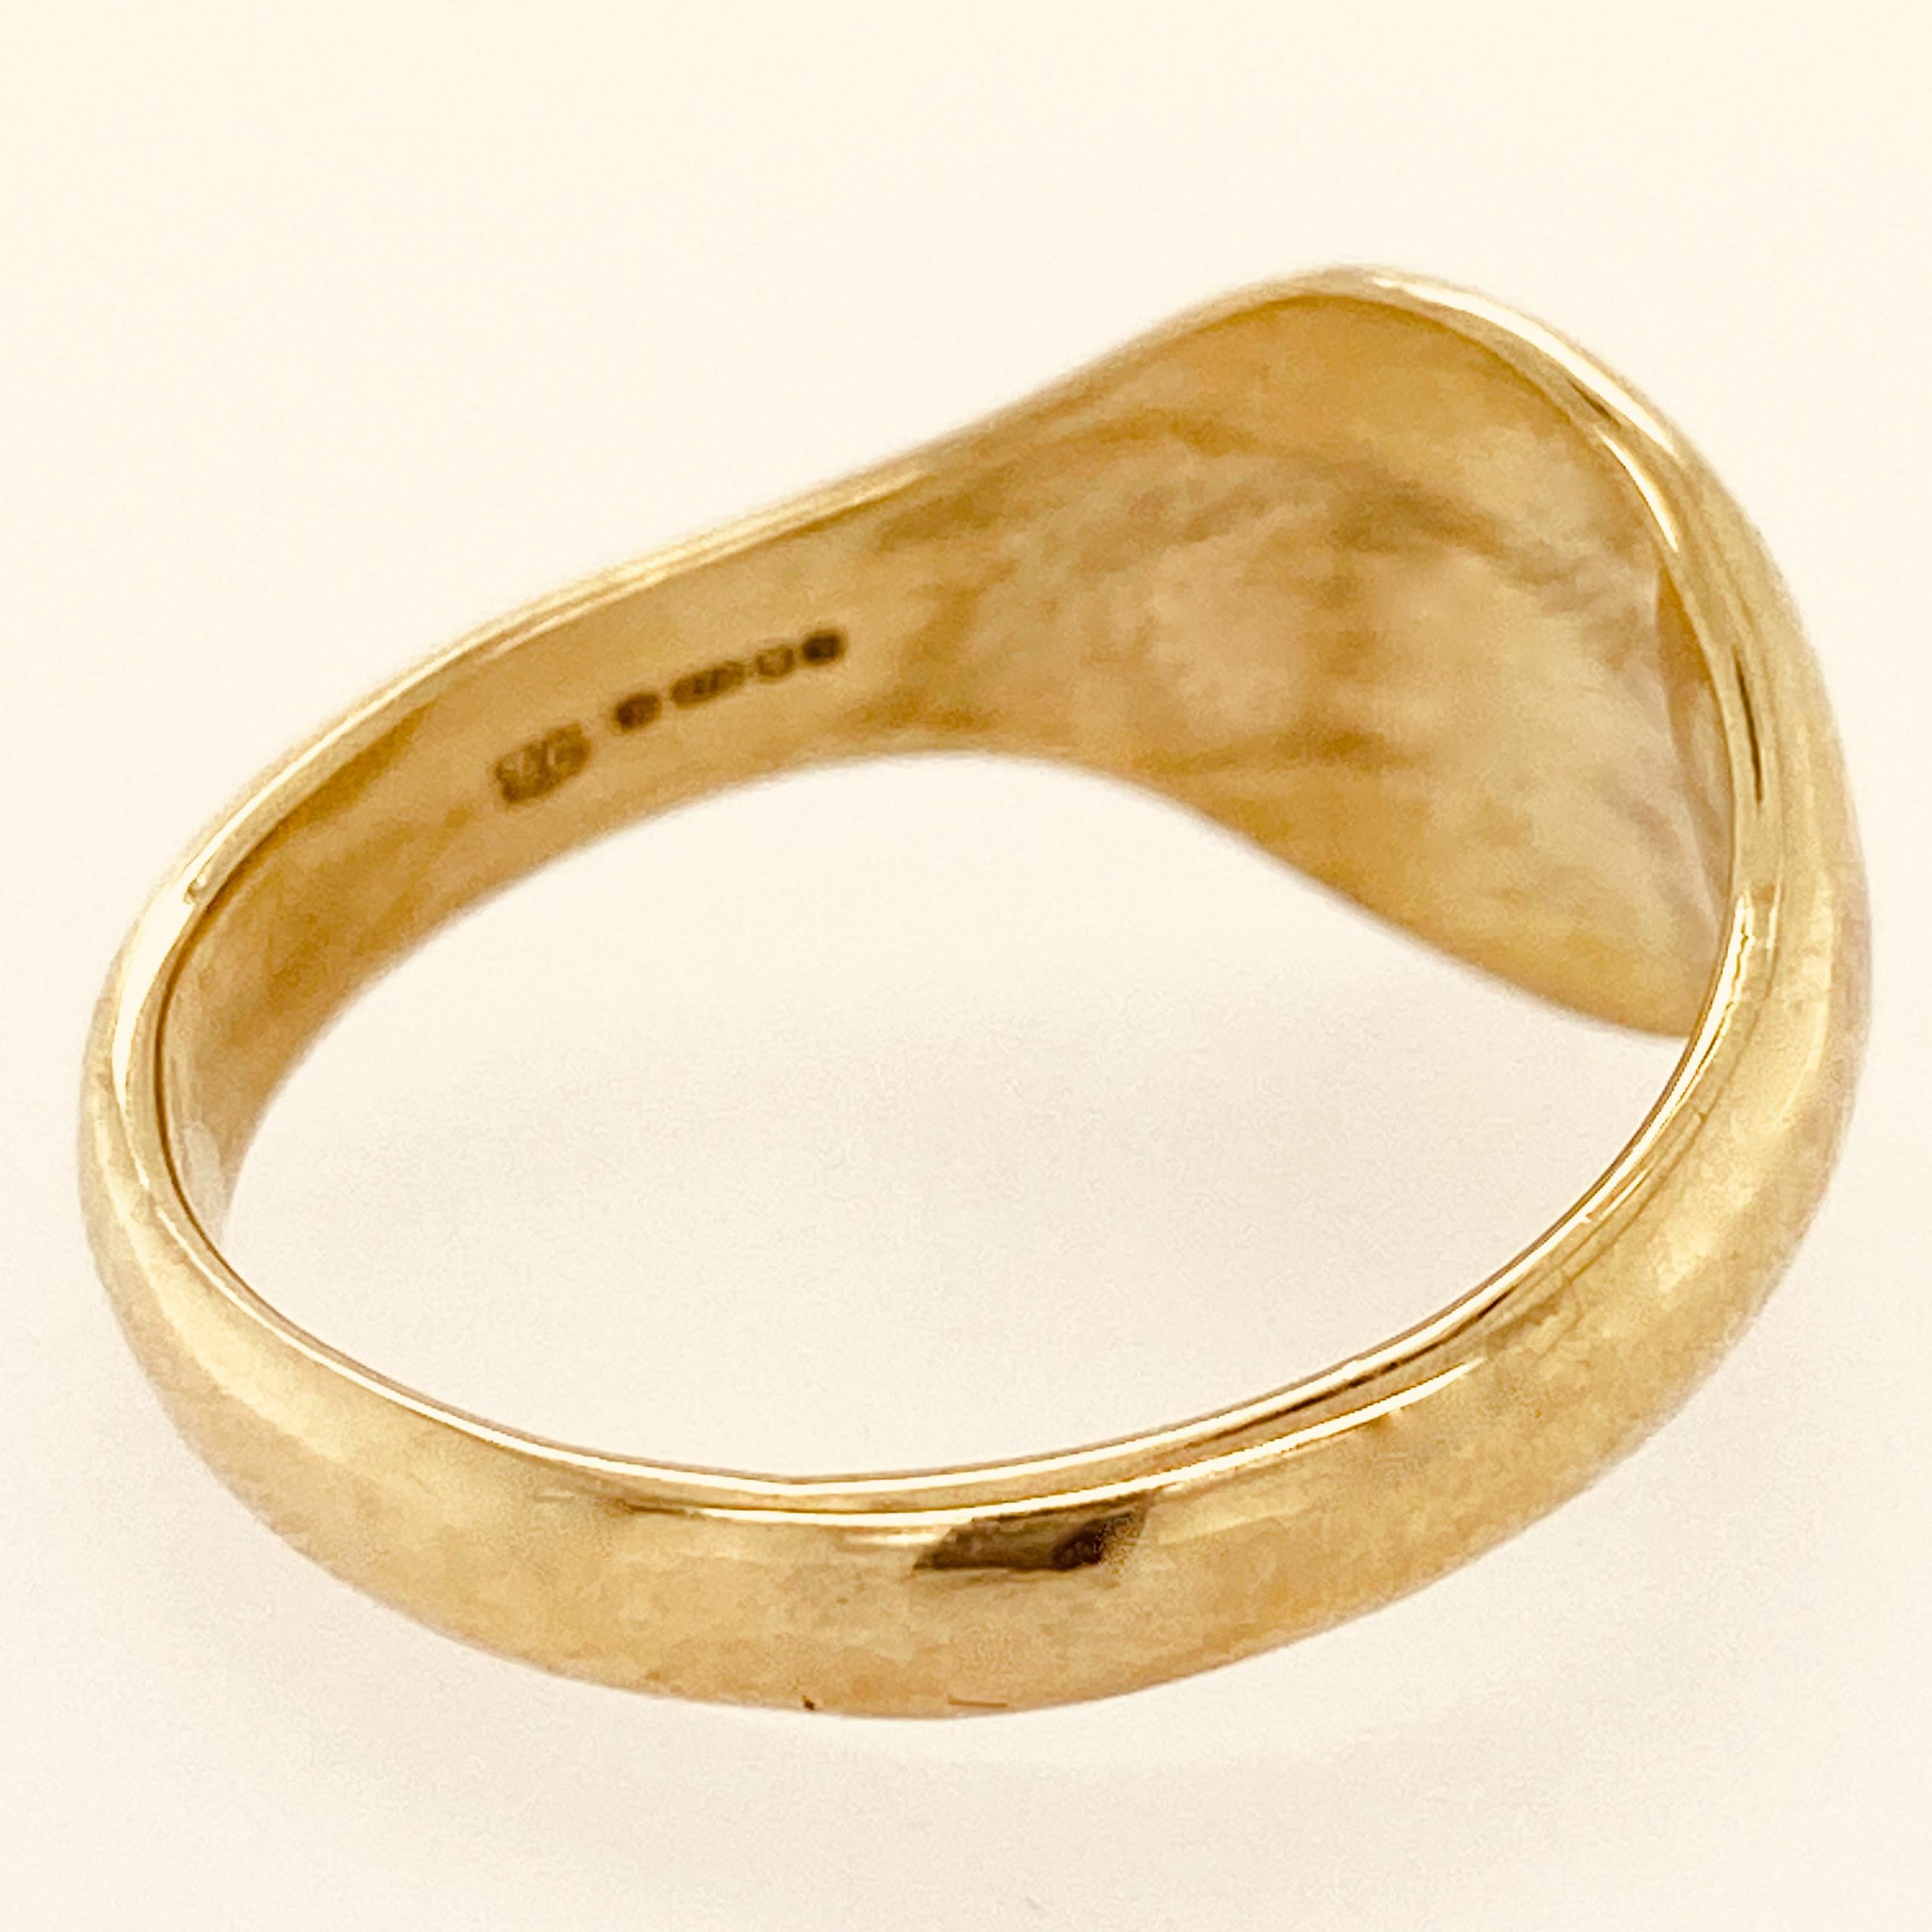 Contemporary Petite British Signet Ring with Couped Boar's Head in Yellow Gold